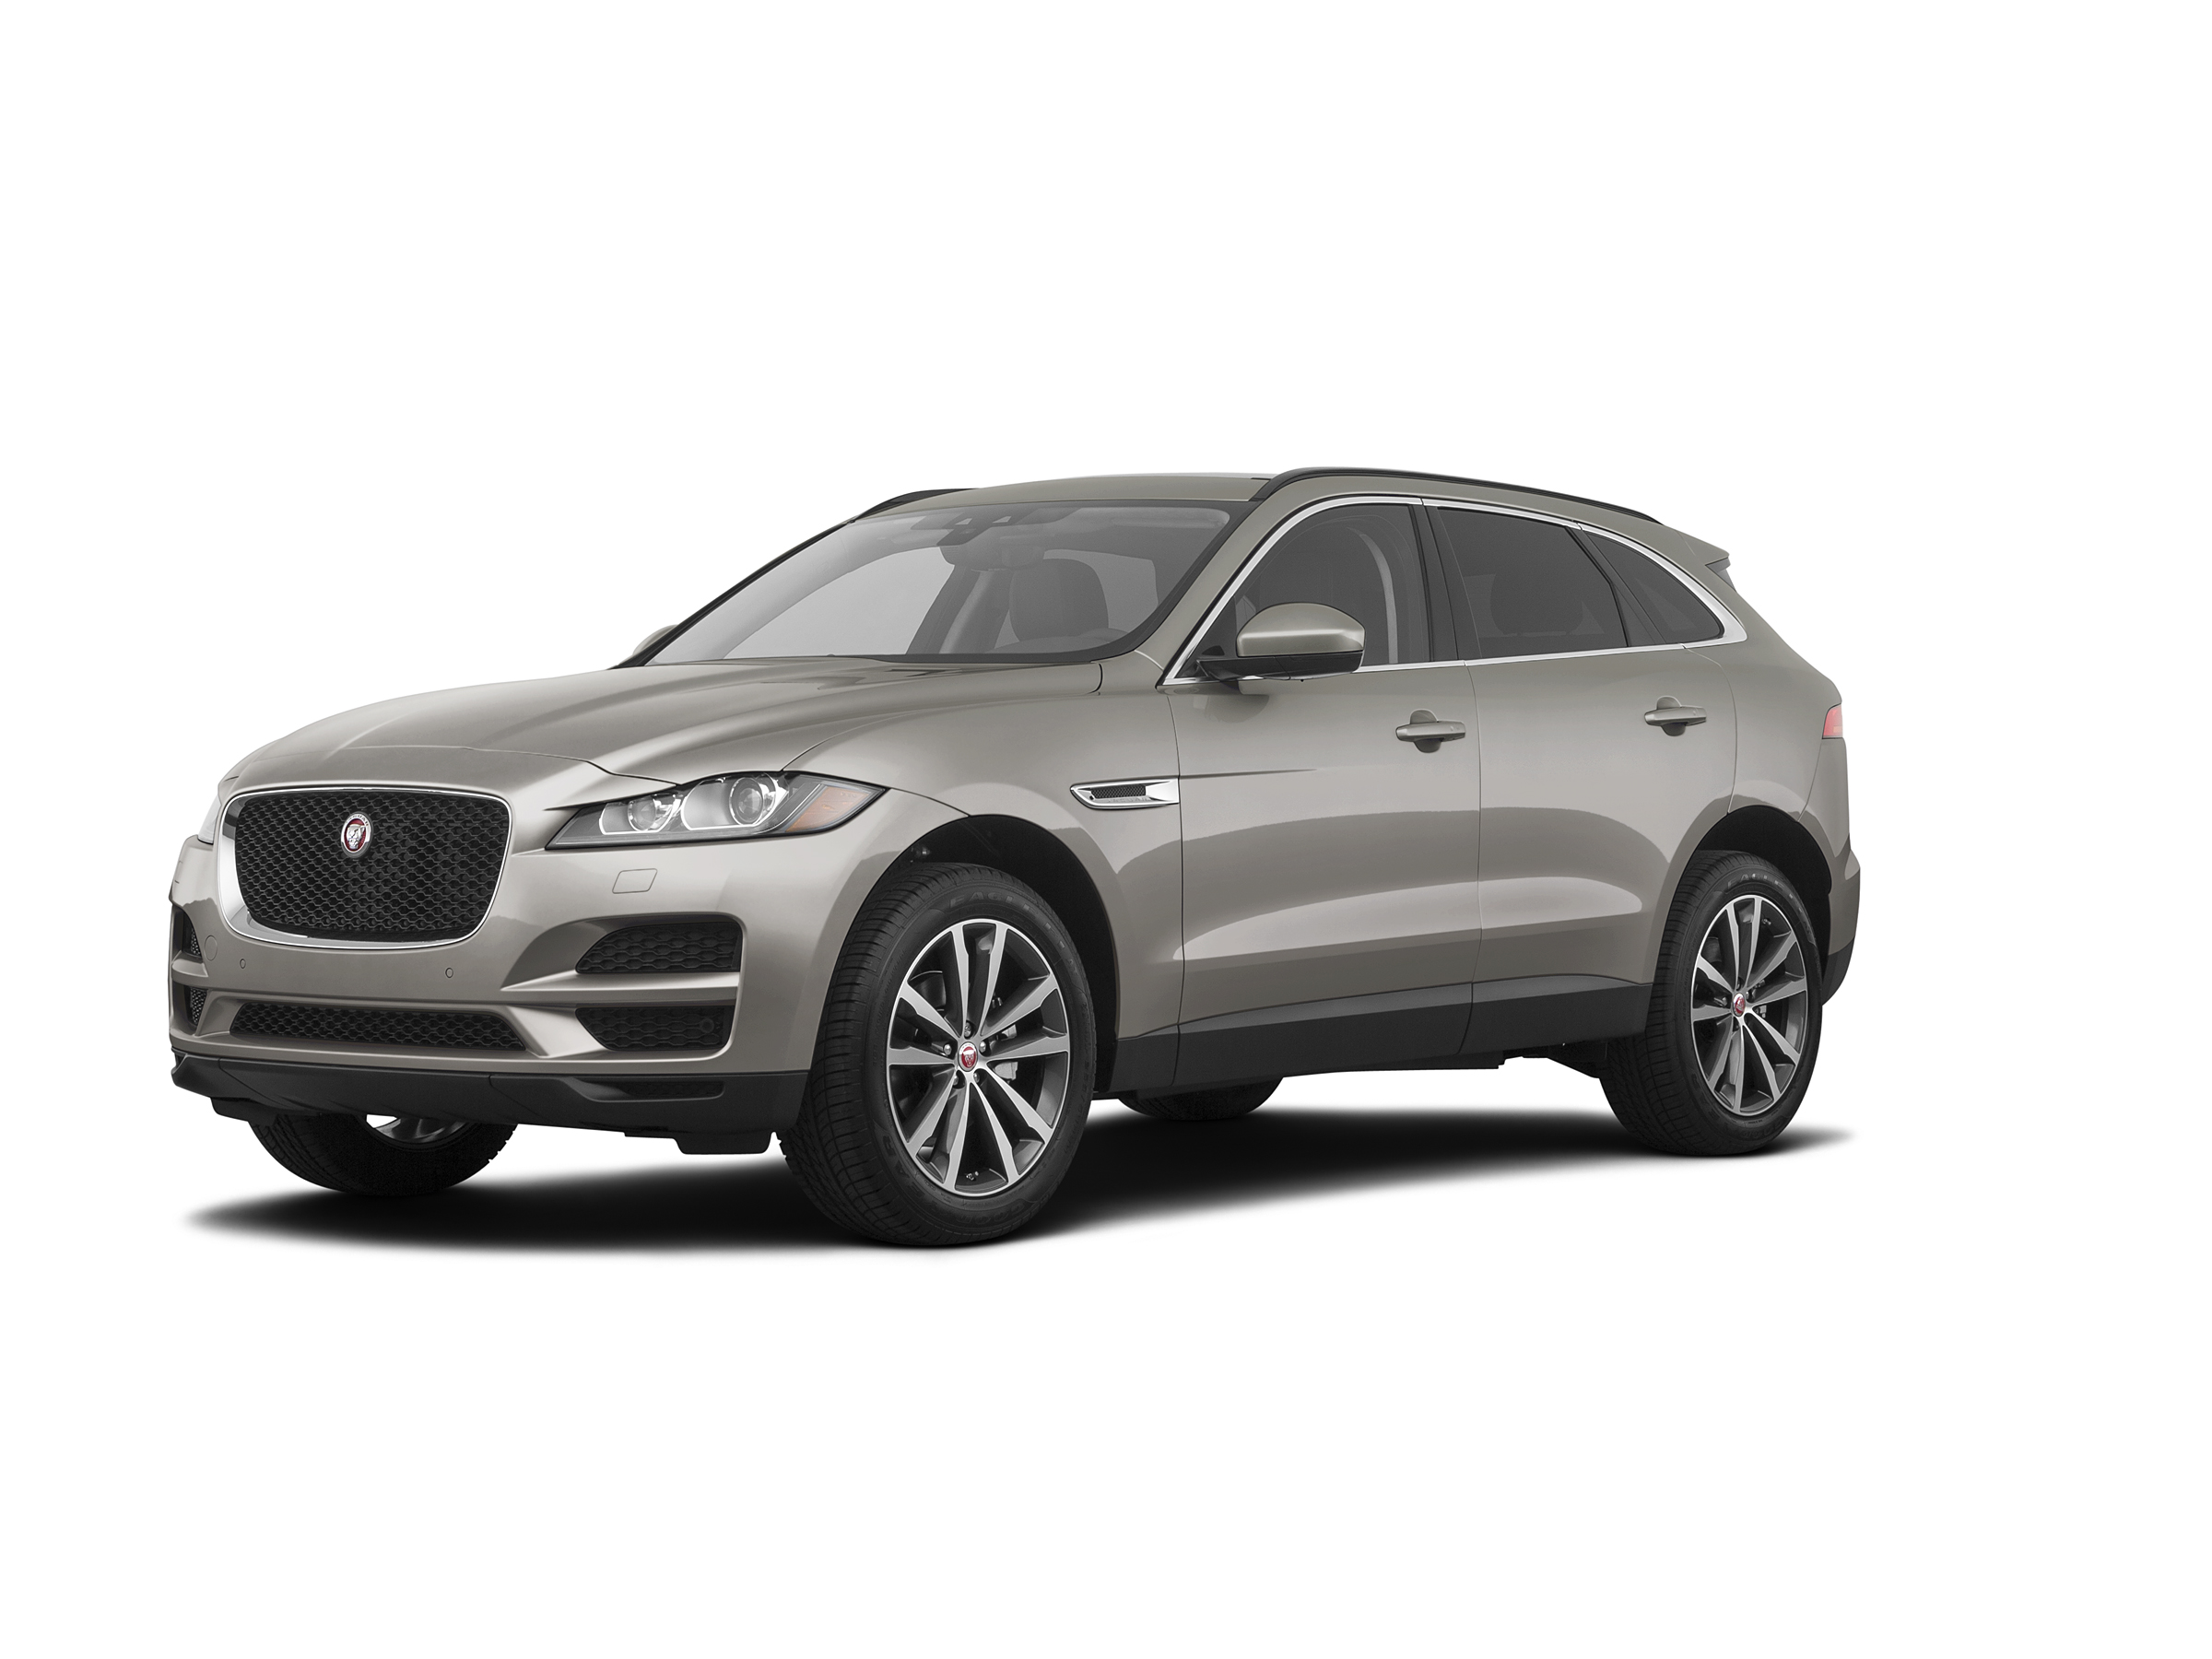 Looking to buy a Jaguar F Pace SUV near Fort Myers? We carry new and used Jaguar for sale.